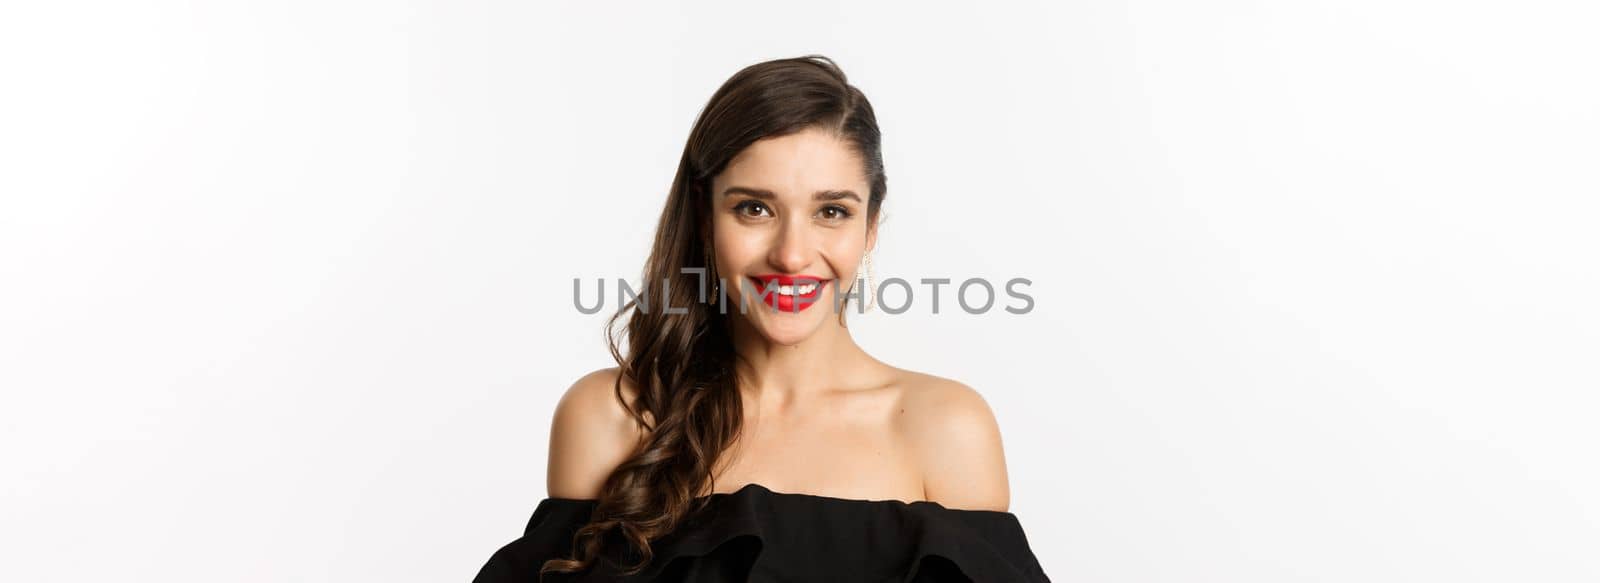 Close-up of beautiful woman dressed for party in black dress, wearing makeup and red lipstick, smiling happy at camera, white background.